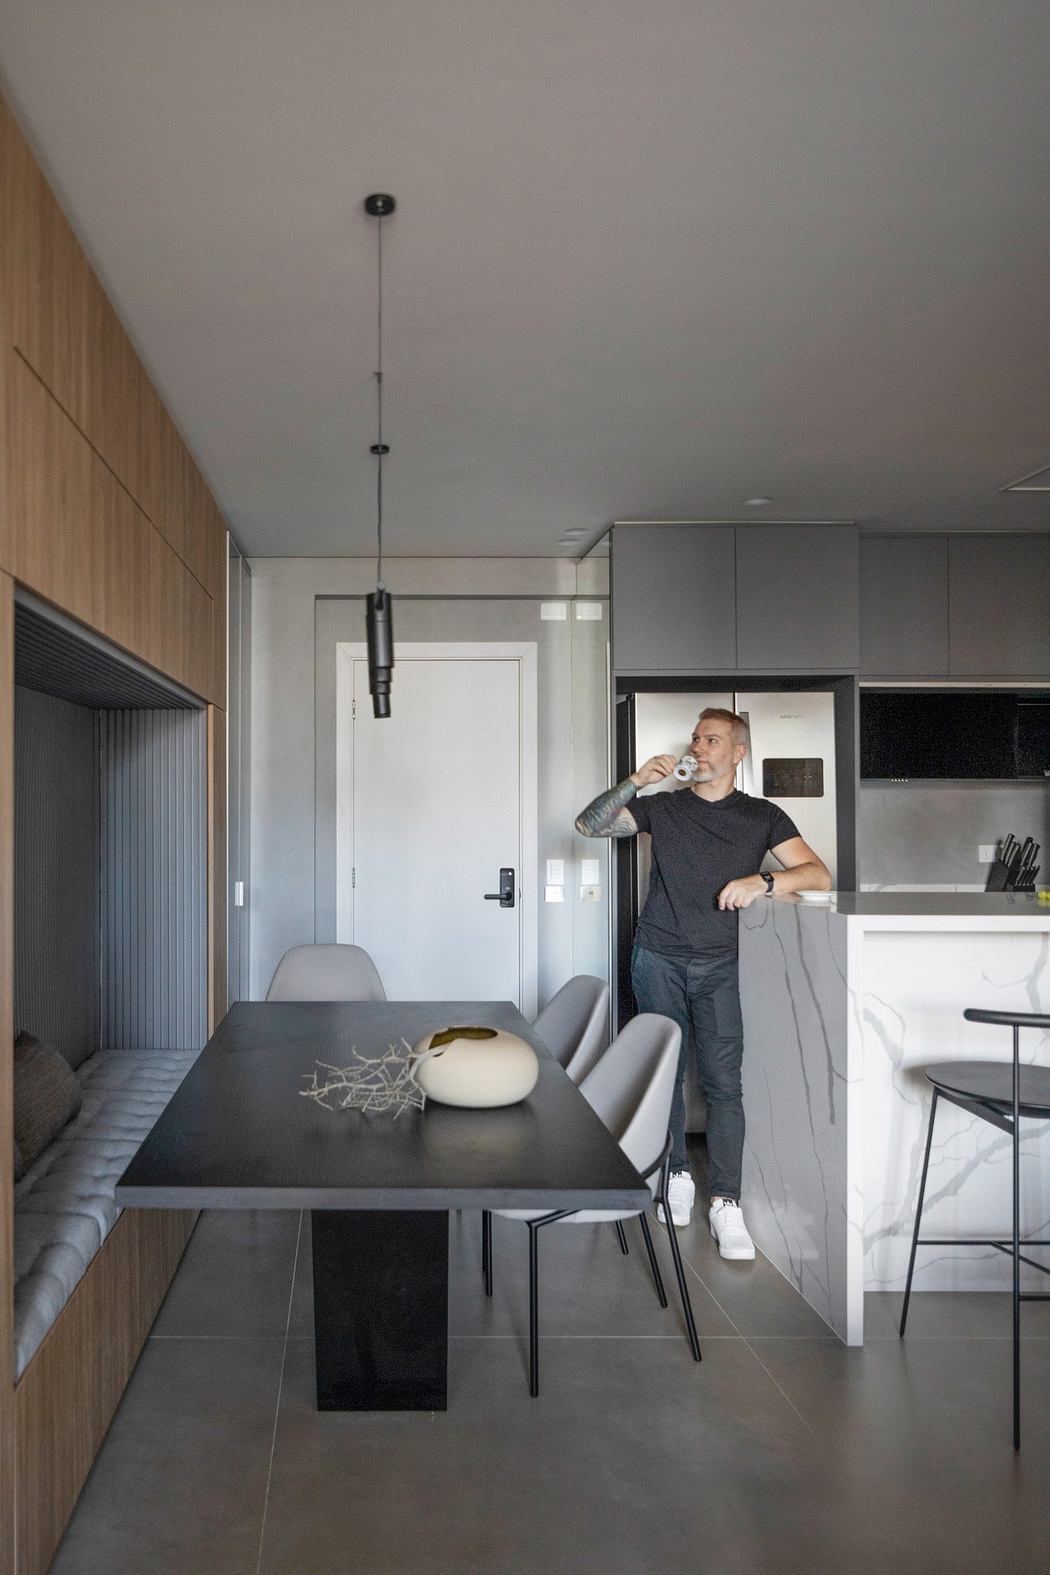 Man standing in a modern kitchen with dining area and minimalist decor.